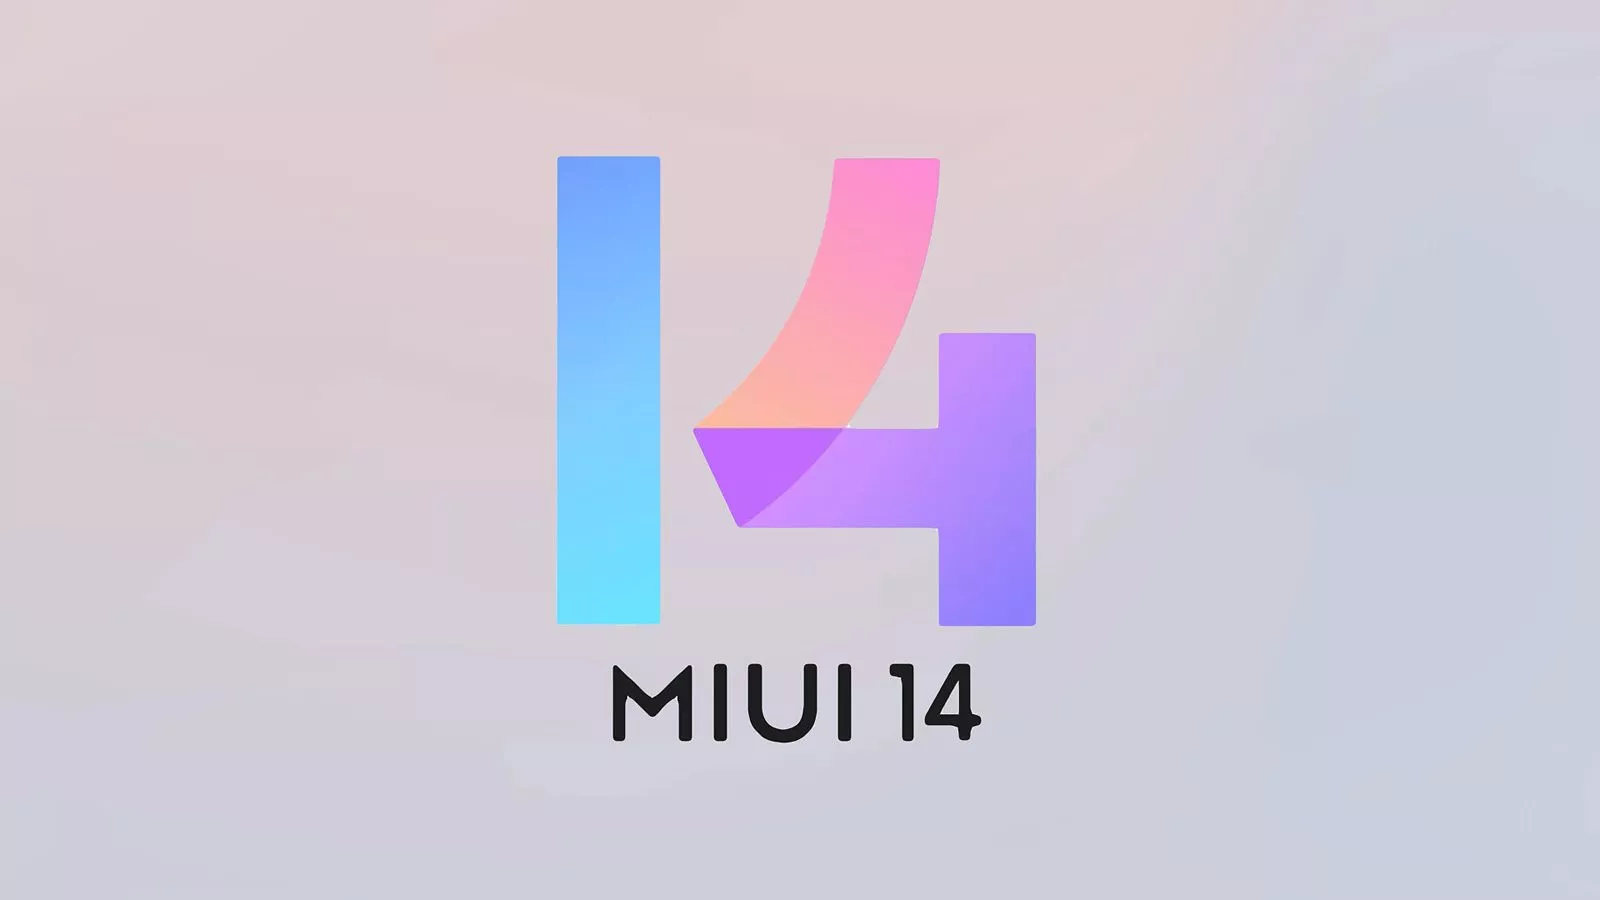 The original wallpaper from MIUI 14 is now available for download